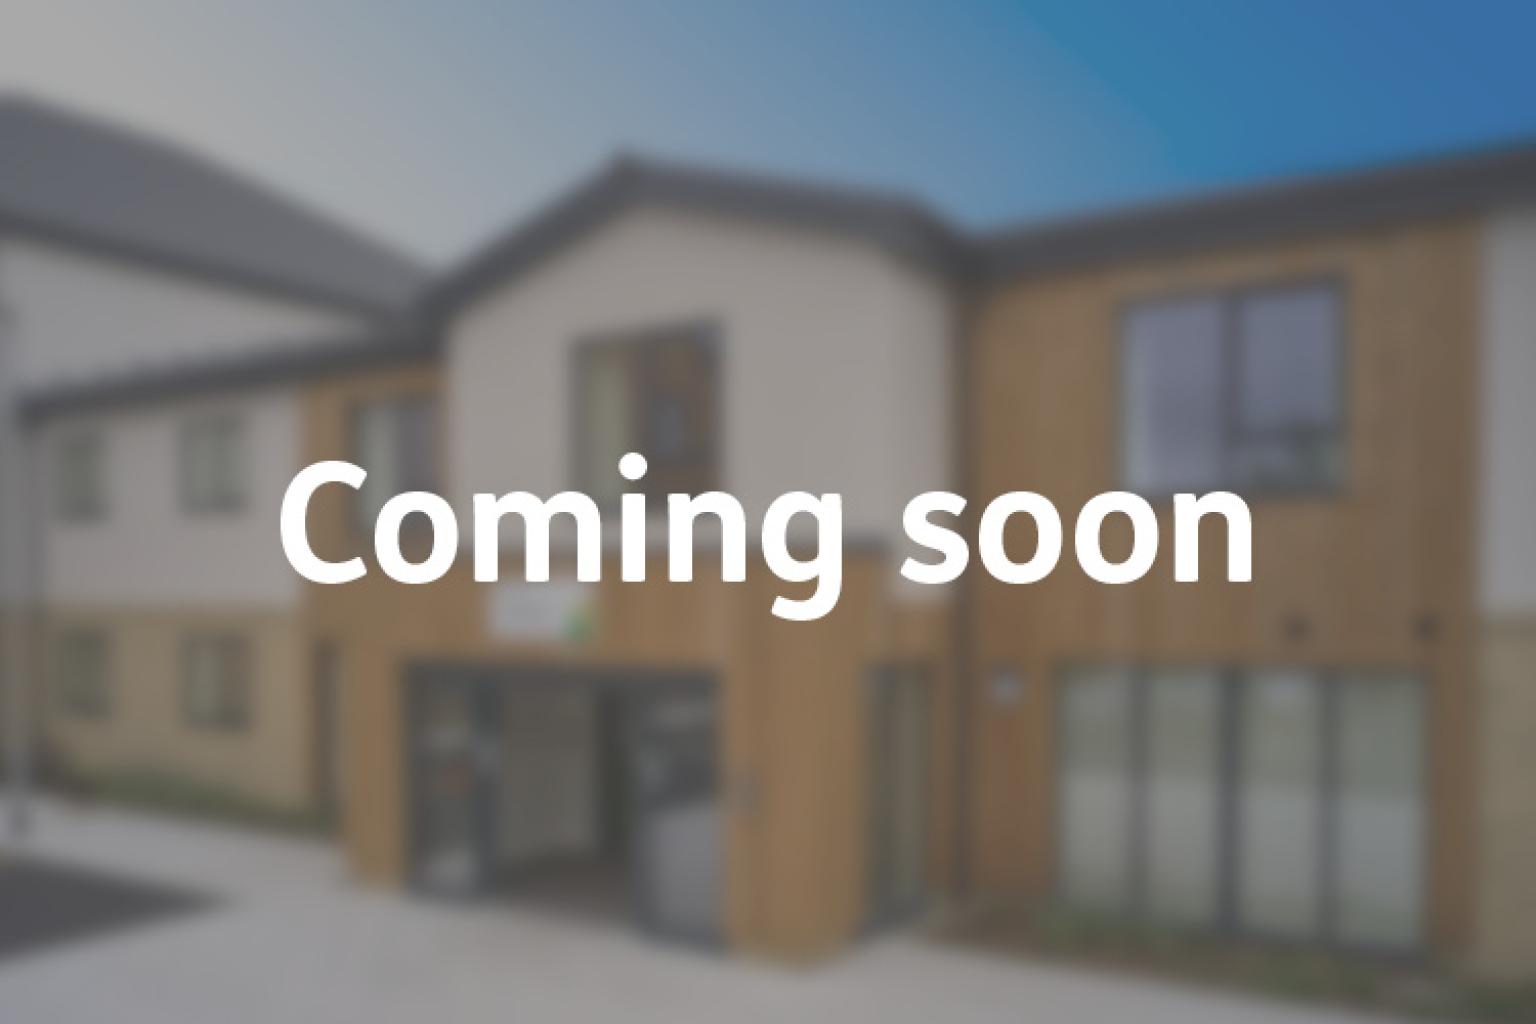 Blurred image of a care home coming soon